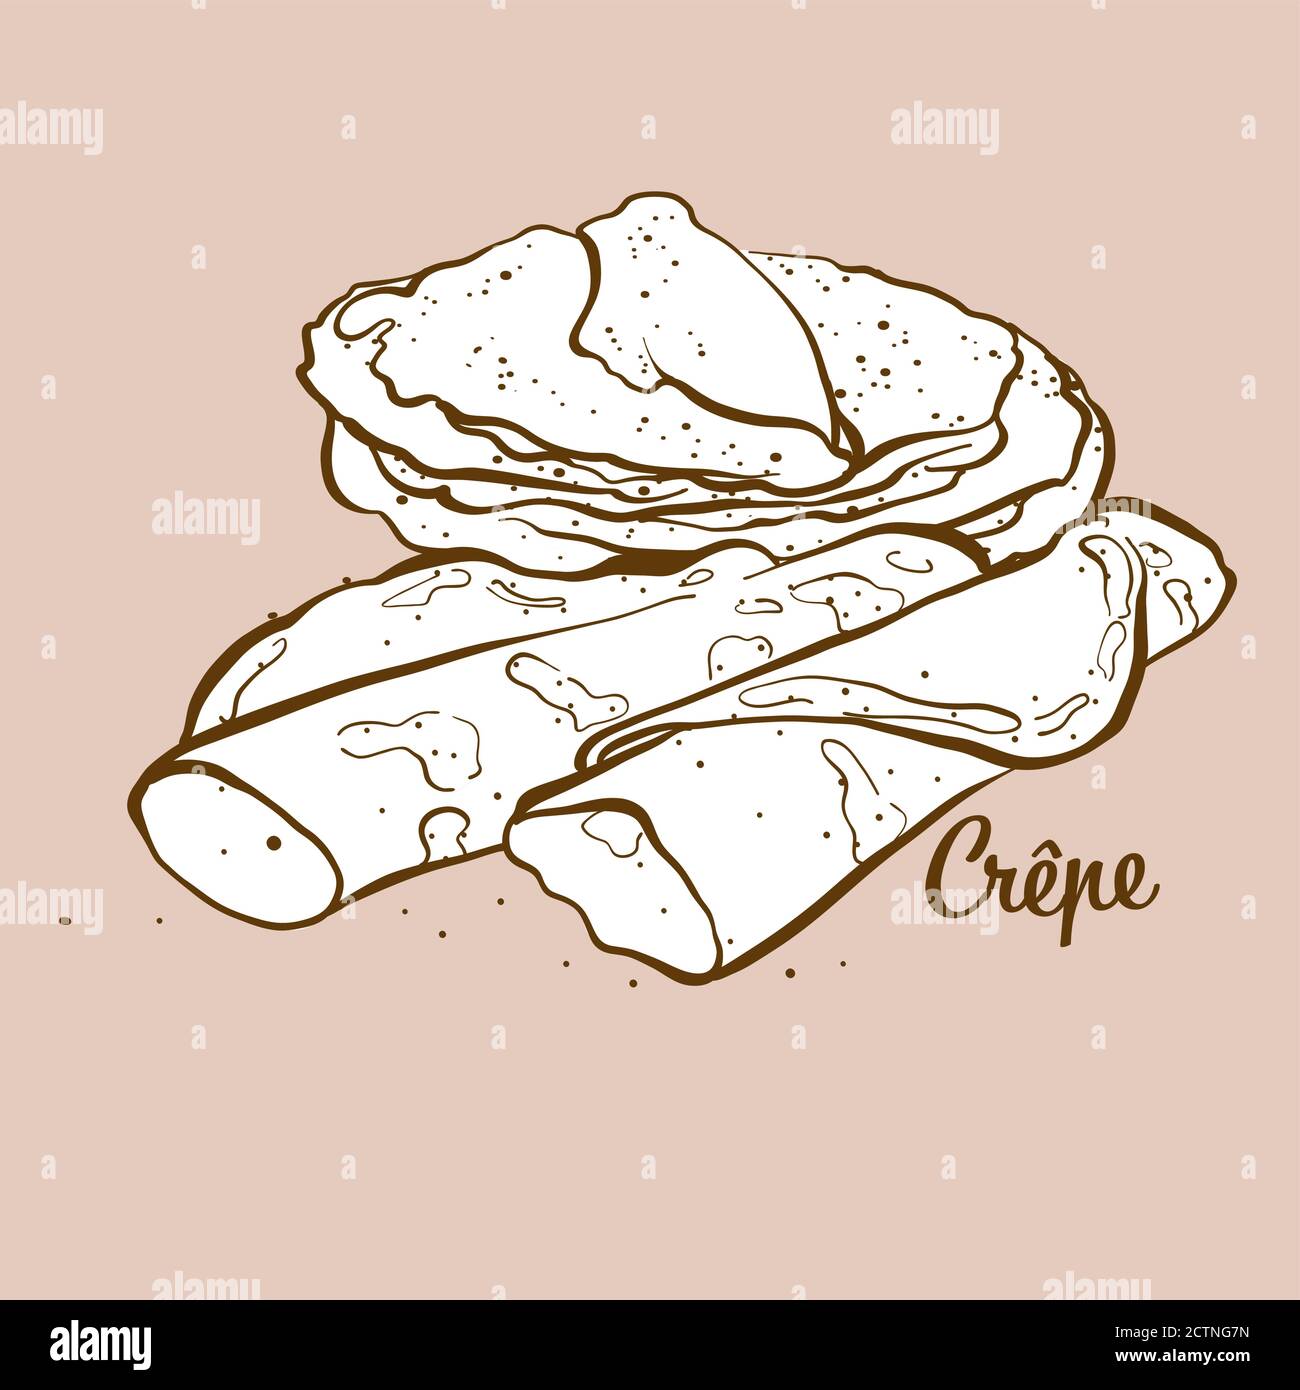 Hand-drawn Crepe bread illustration. Pancake, usually known in France. Vector drawing series. Stock Vector